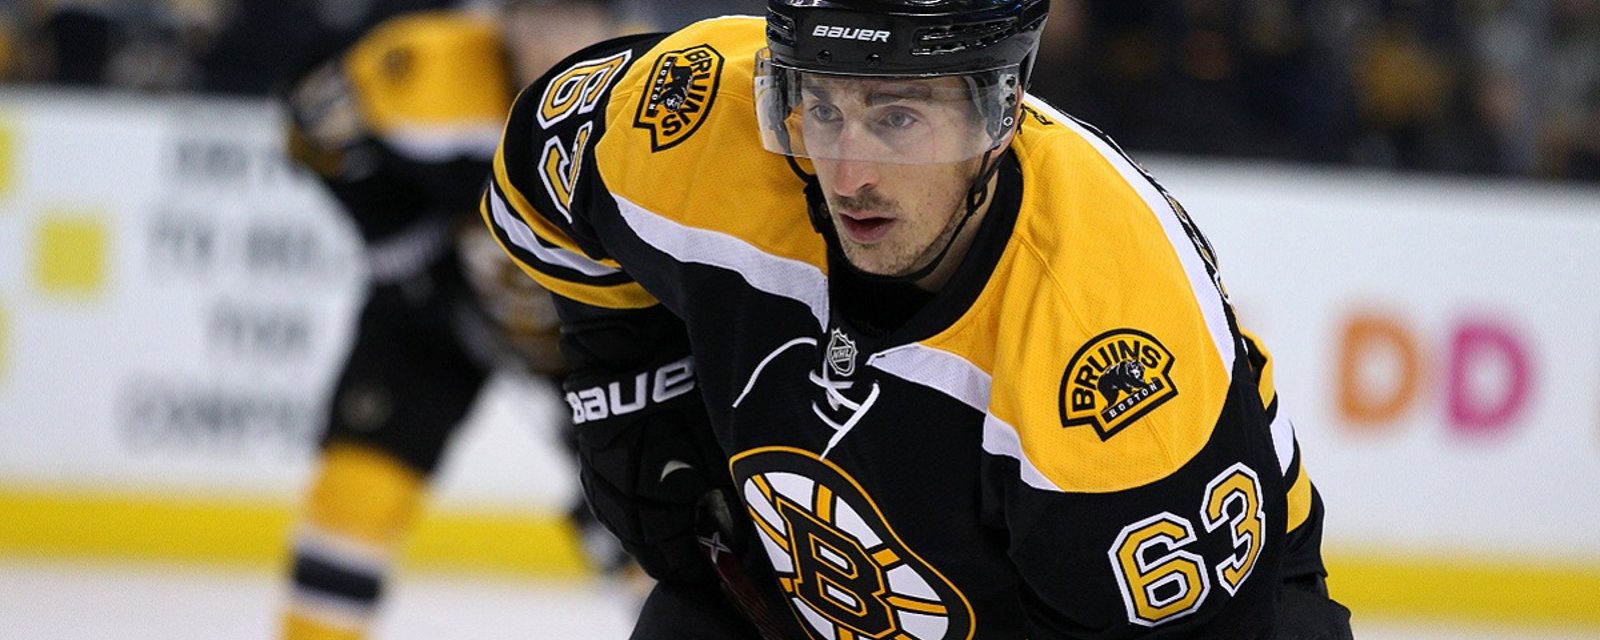 Cameras catch another inexcusable cheap shot from Brad Marchand.